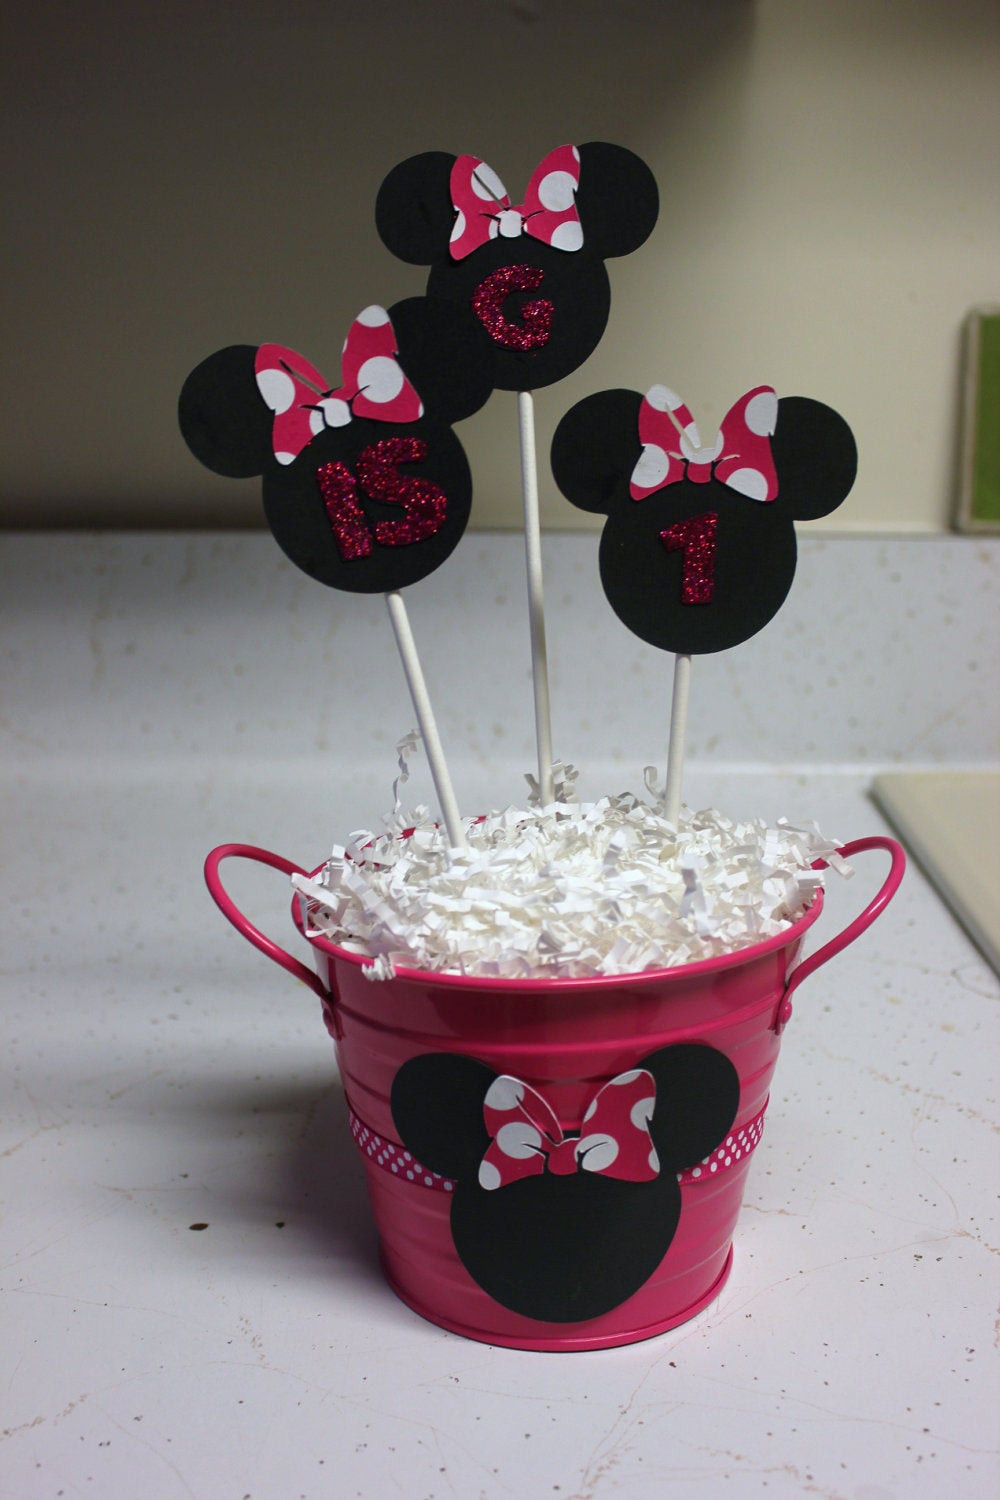 Minnie Mouse Birthday Party Decoration Ideas
 Items similar to Minnie Mouse Centerpiece Minnie